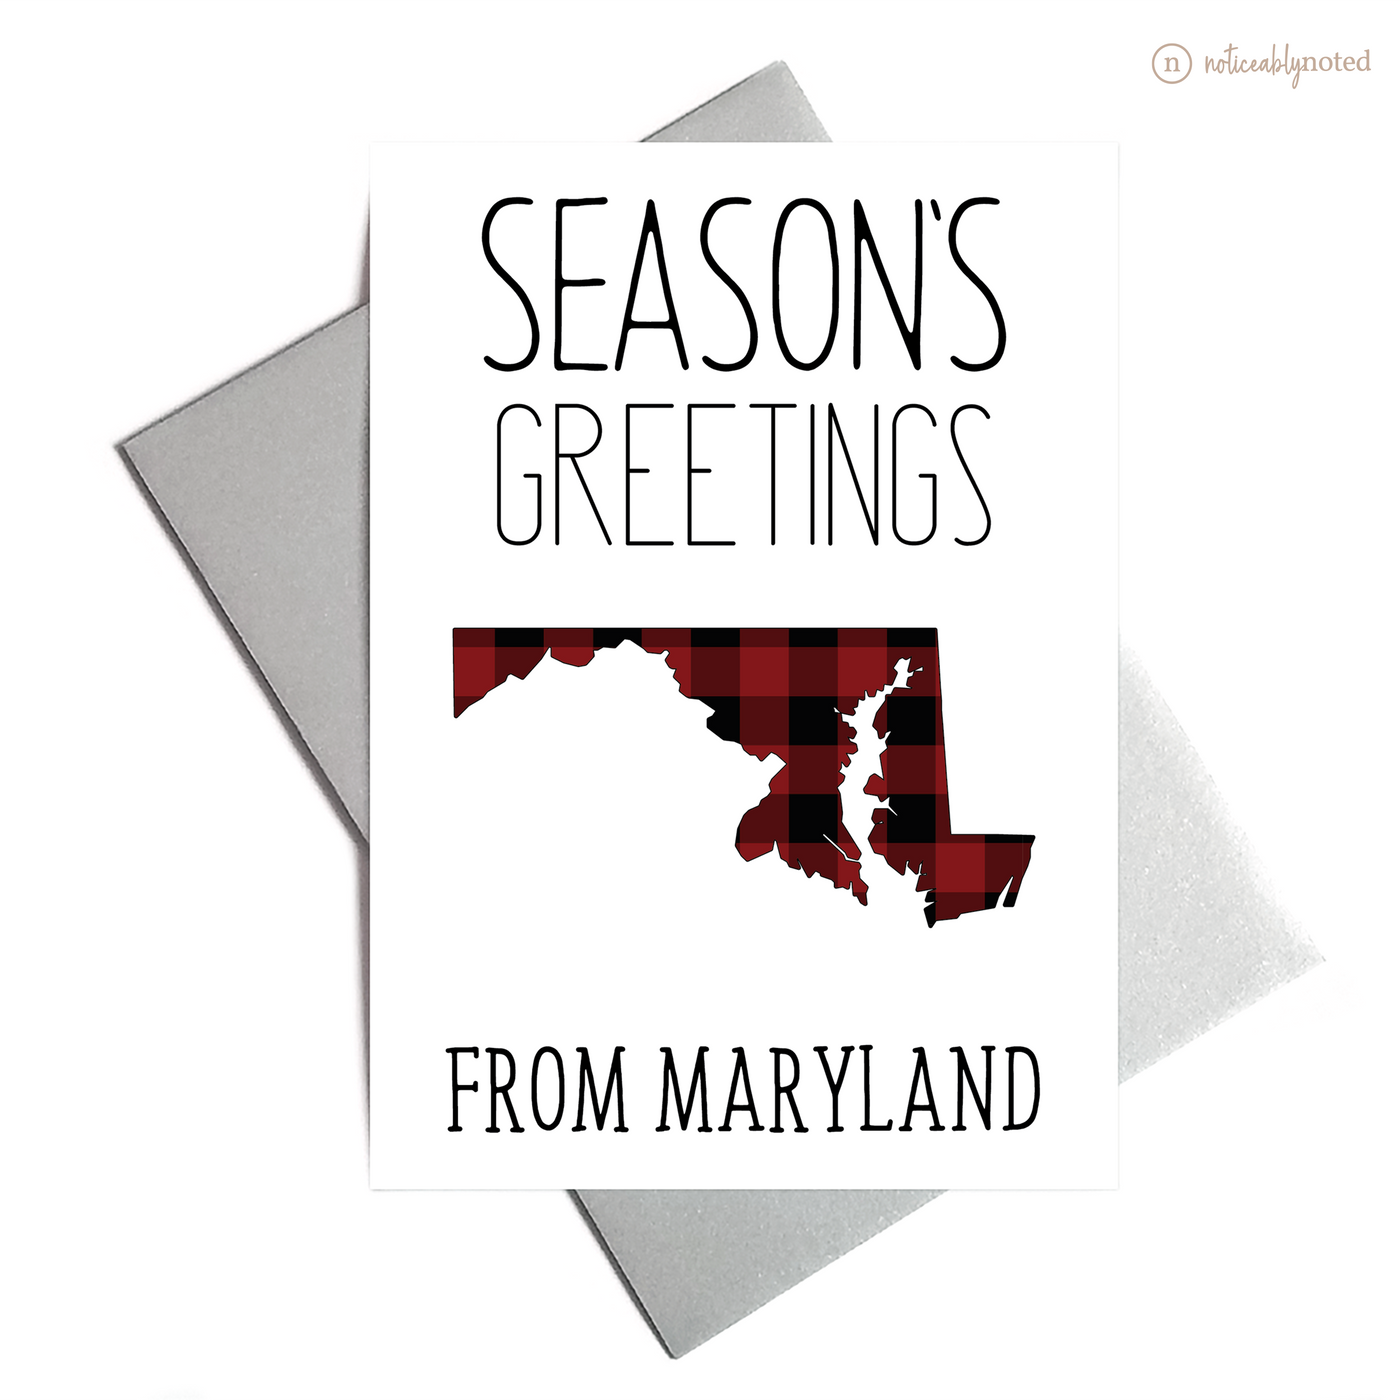 Maryland Christmas Cards | Noticeably Noted